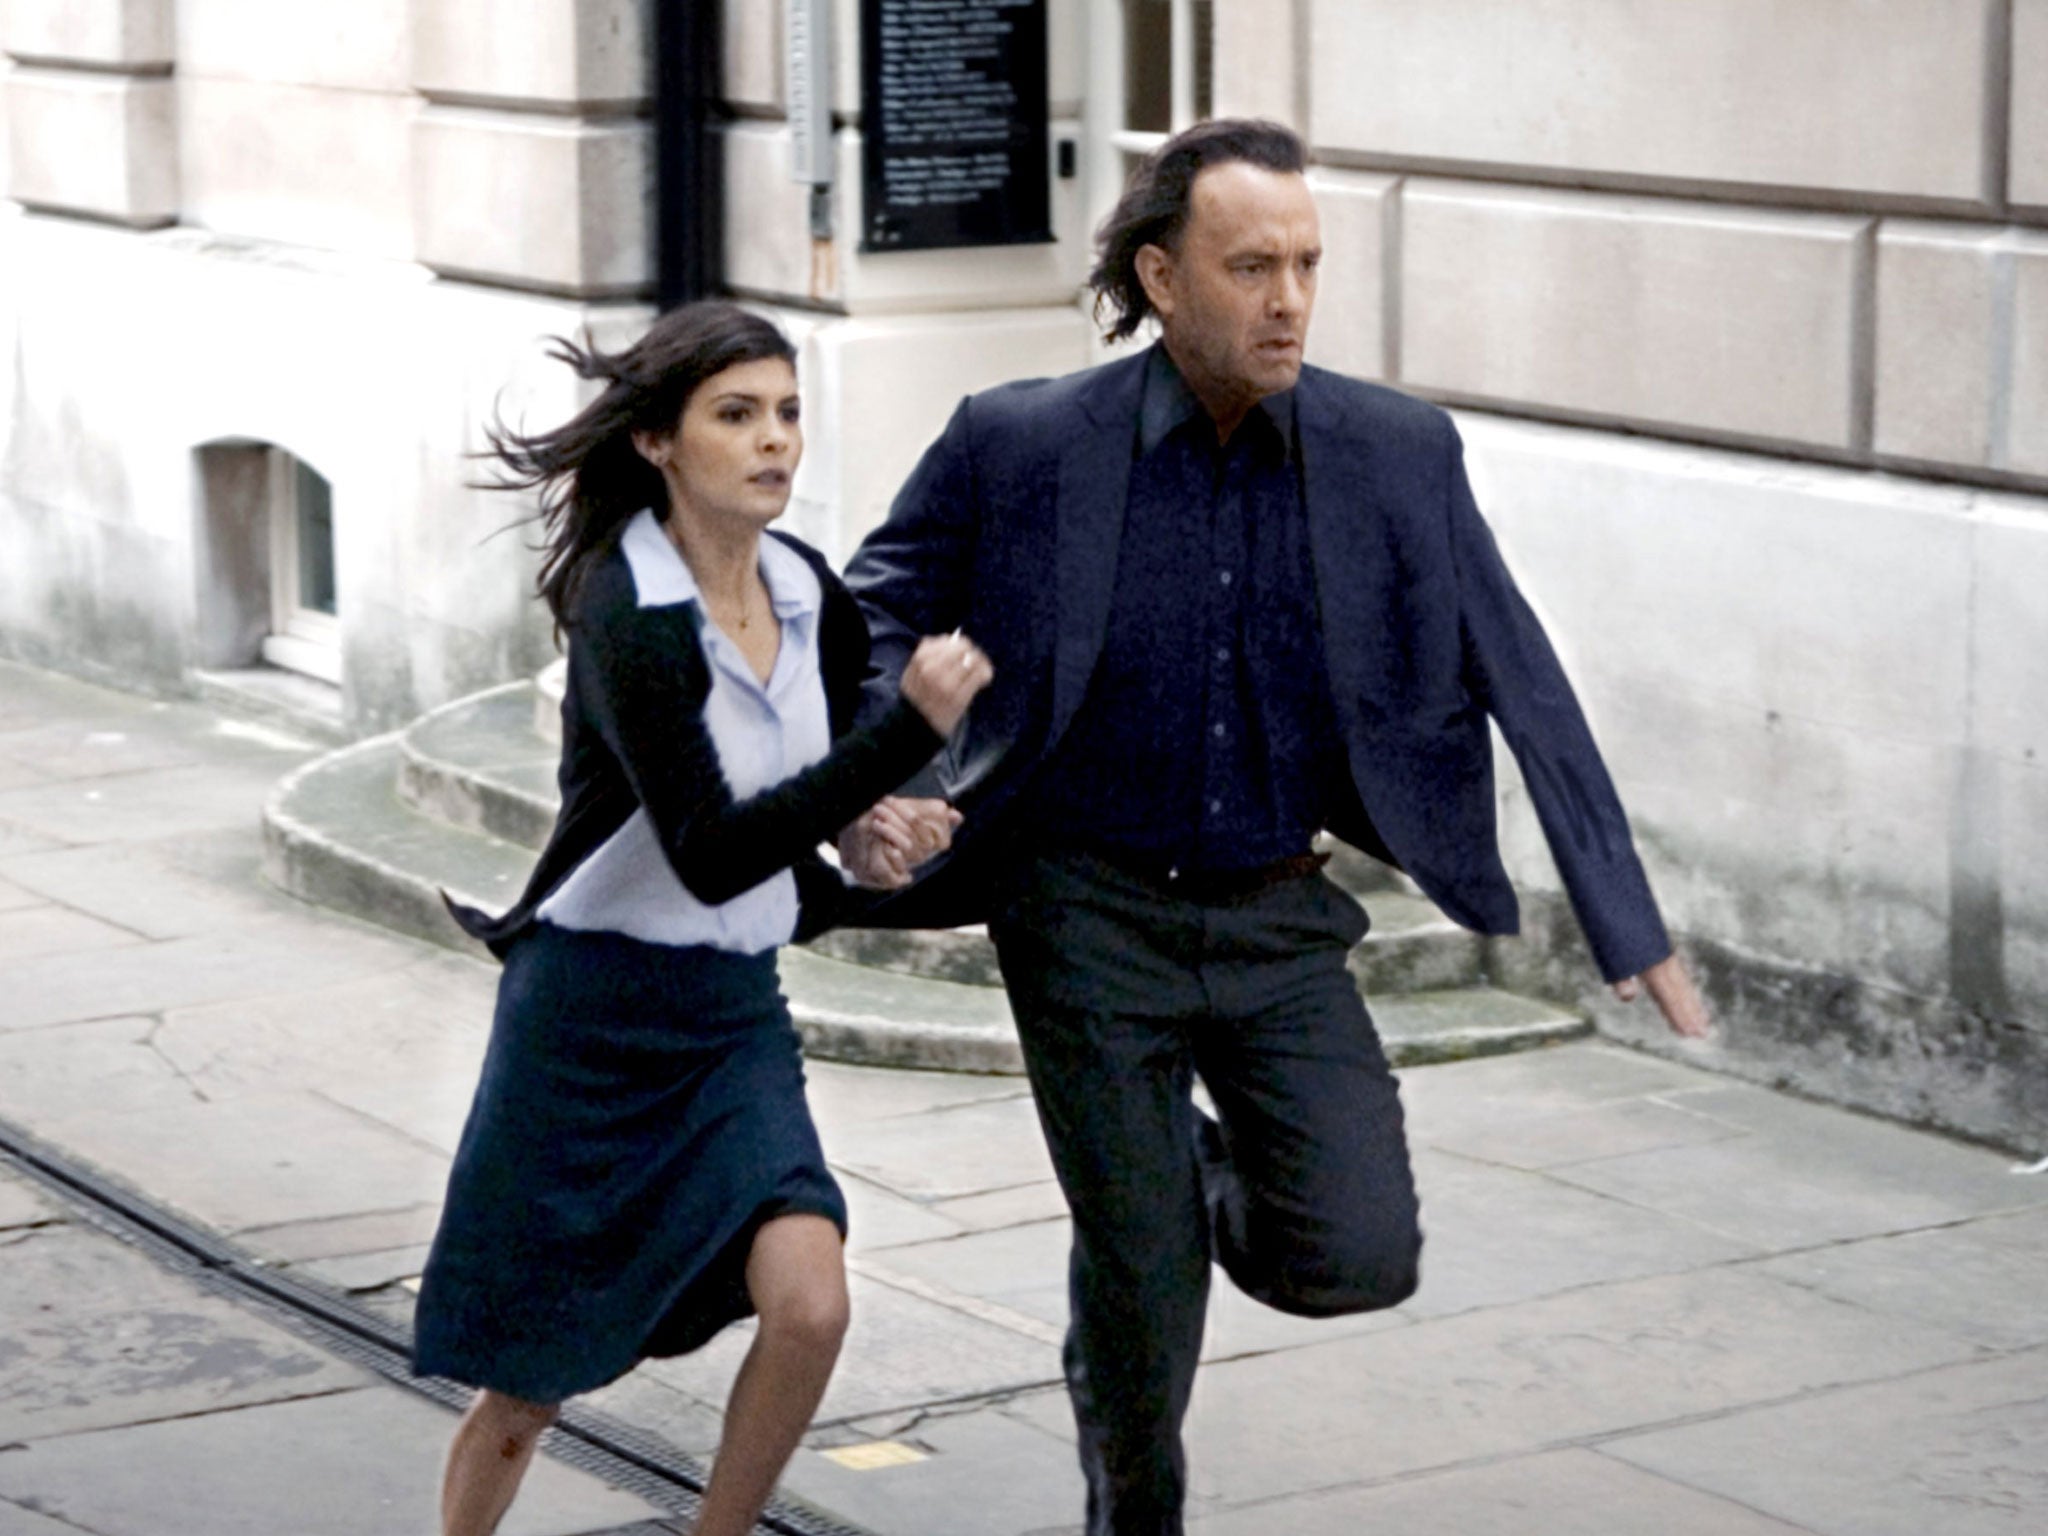 Tom Hanks and Audrey Tautou in Ron Howard's 2006 thriller The Da Vinci Code